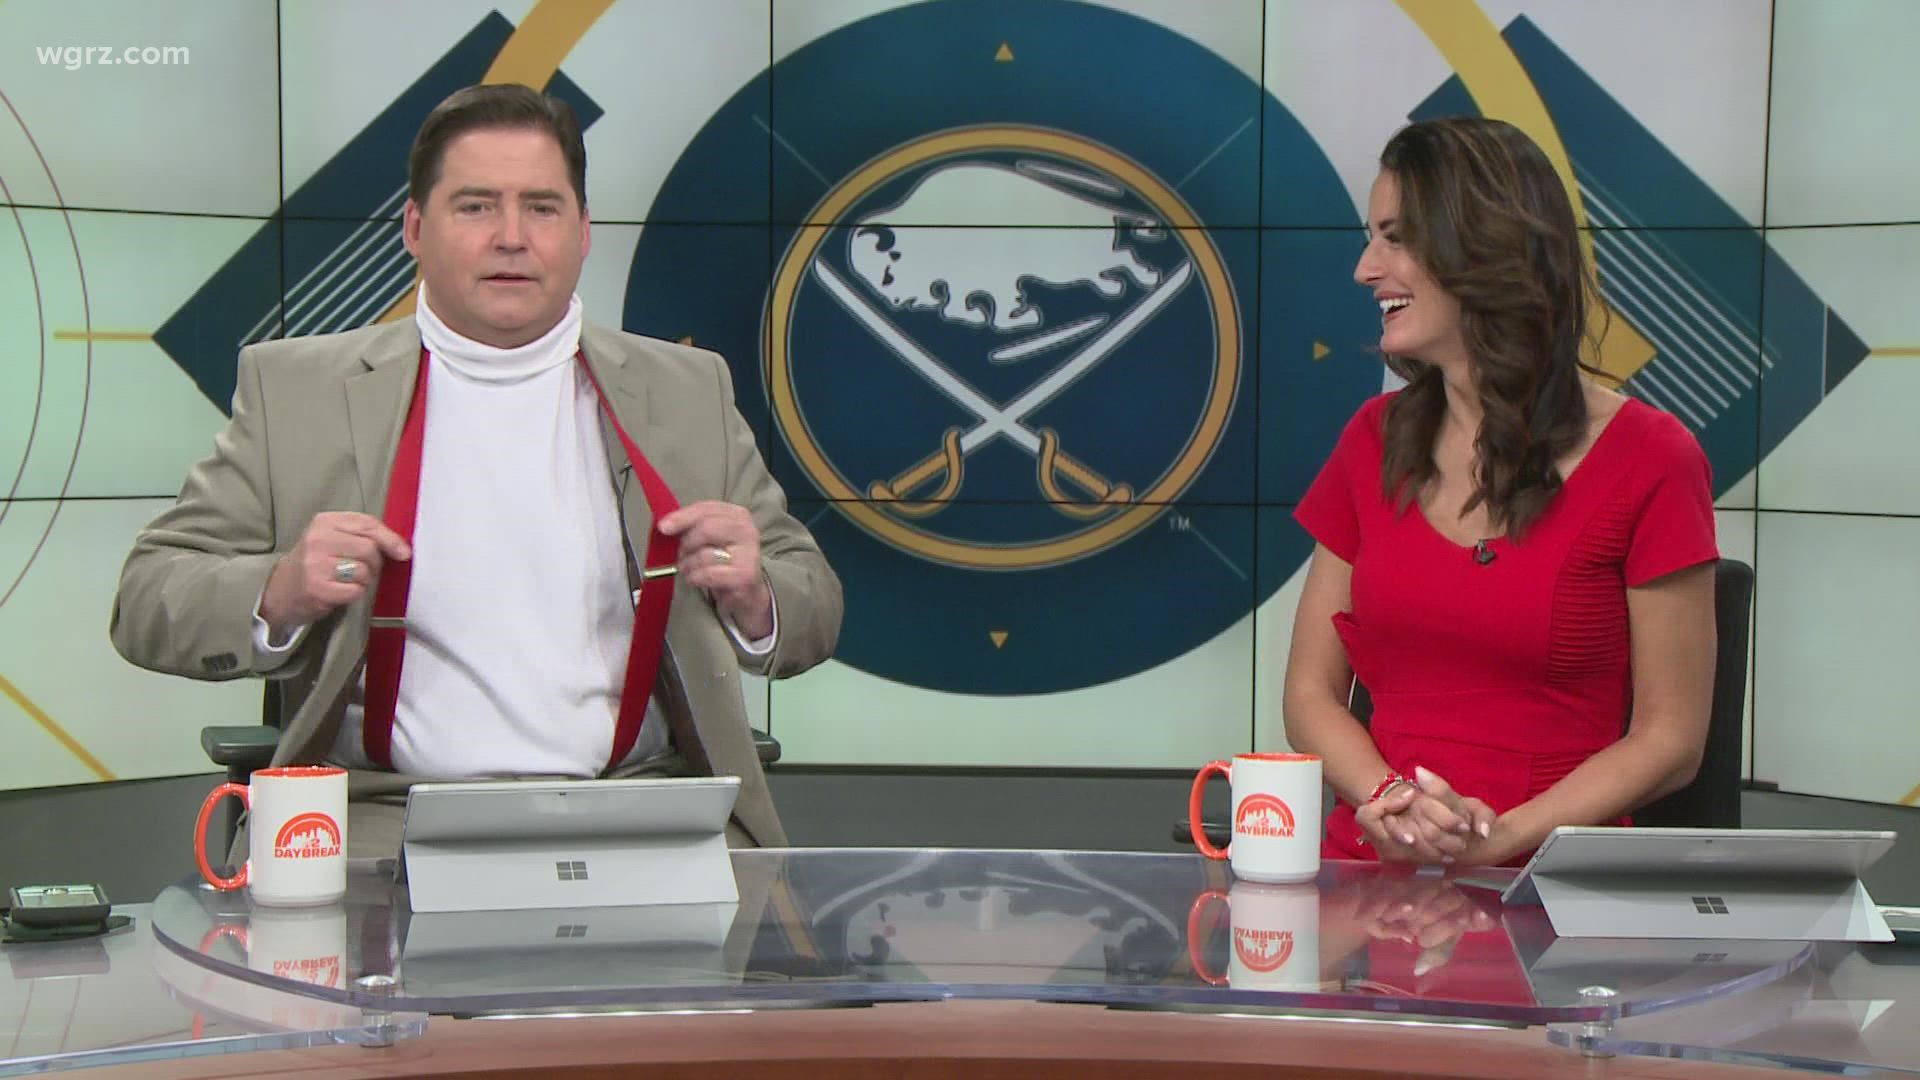 Rick Jeanneret is wrapping up his Hall of Fame career after 51 years. Daybreak's Pete Gallivan pays tribute to Jeanneret by wearing his signature look.